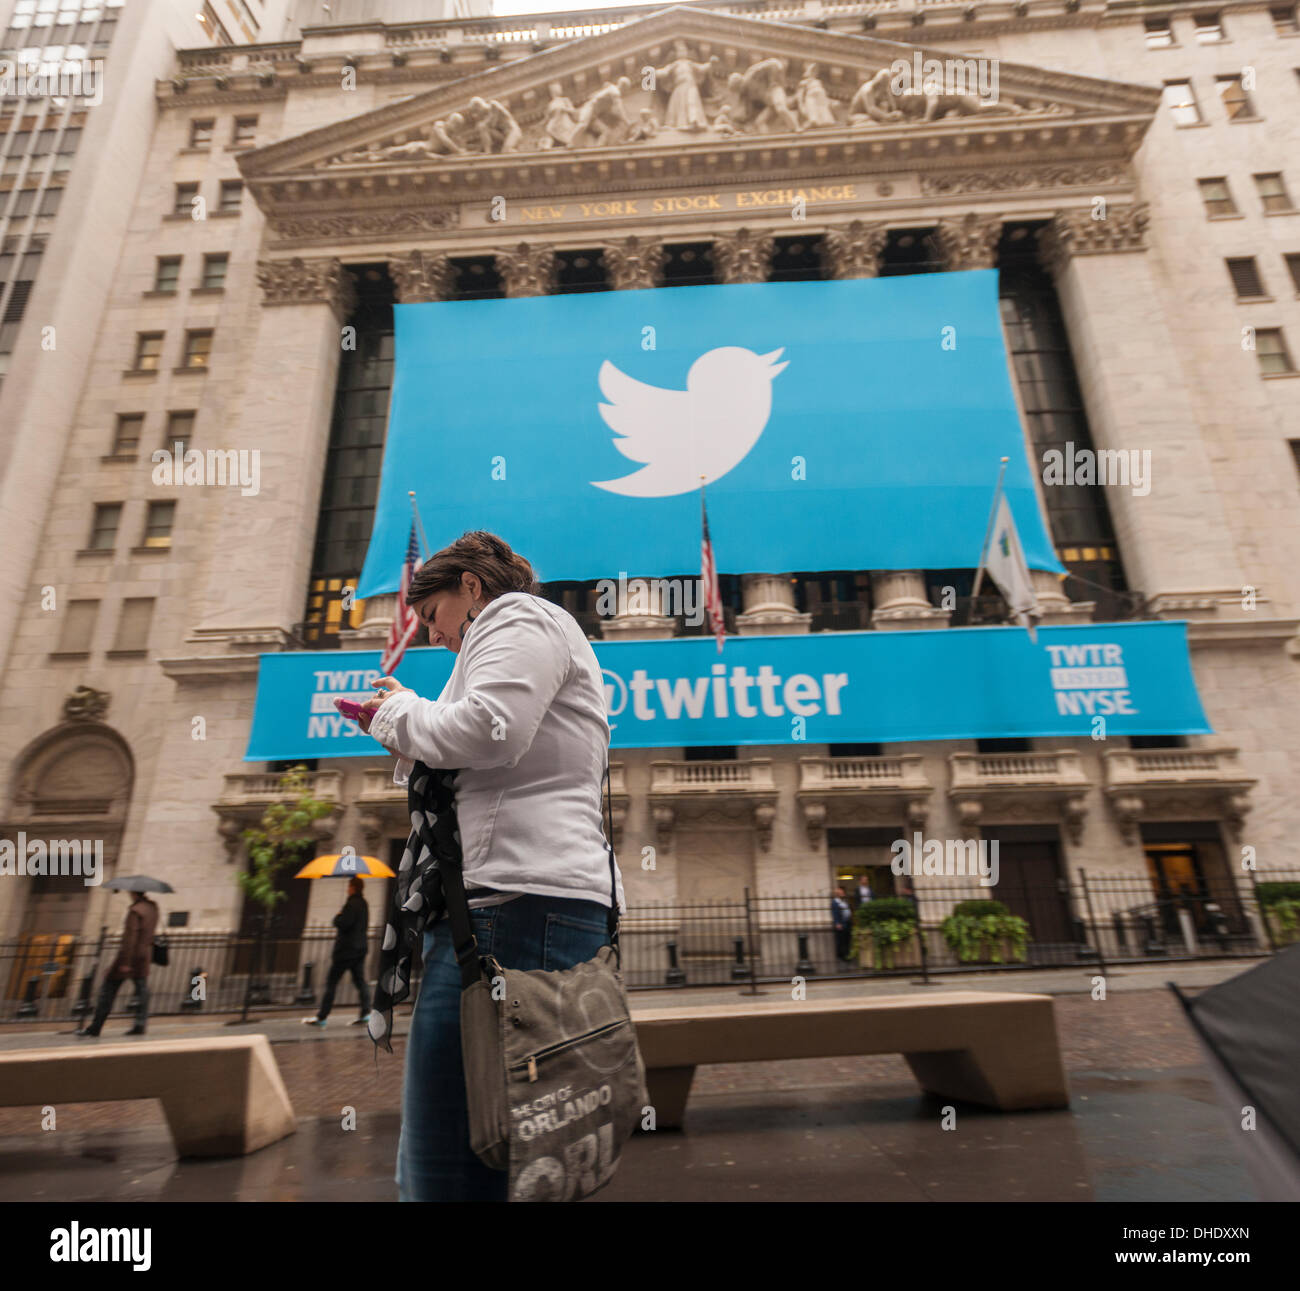 The New York Stock Exchange is decorated for Twitter's initial public offering (IPO) in Lower Manhattan in New York on Thursday, November 7, 2013. The stock surged to $45.10 a share opening at $26.00.   (© Richard B. Levine) Stock Photo